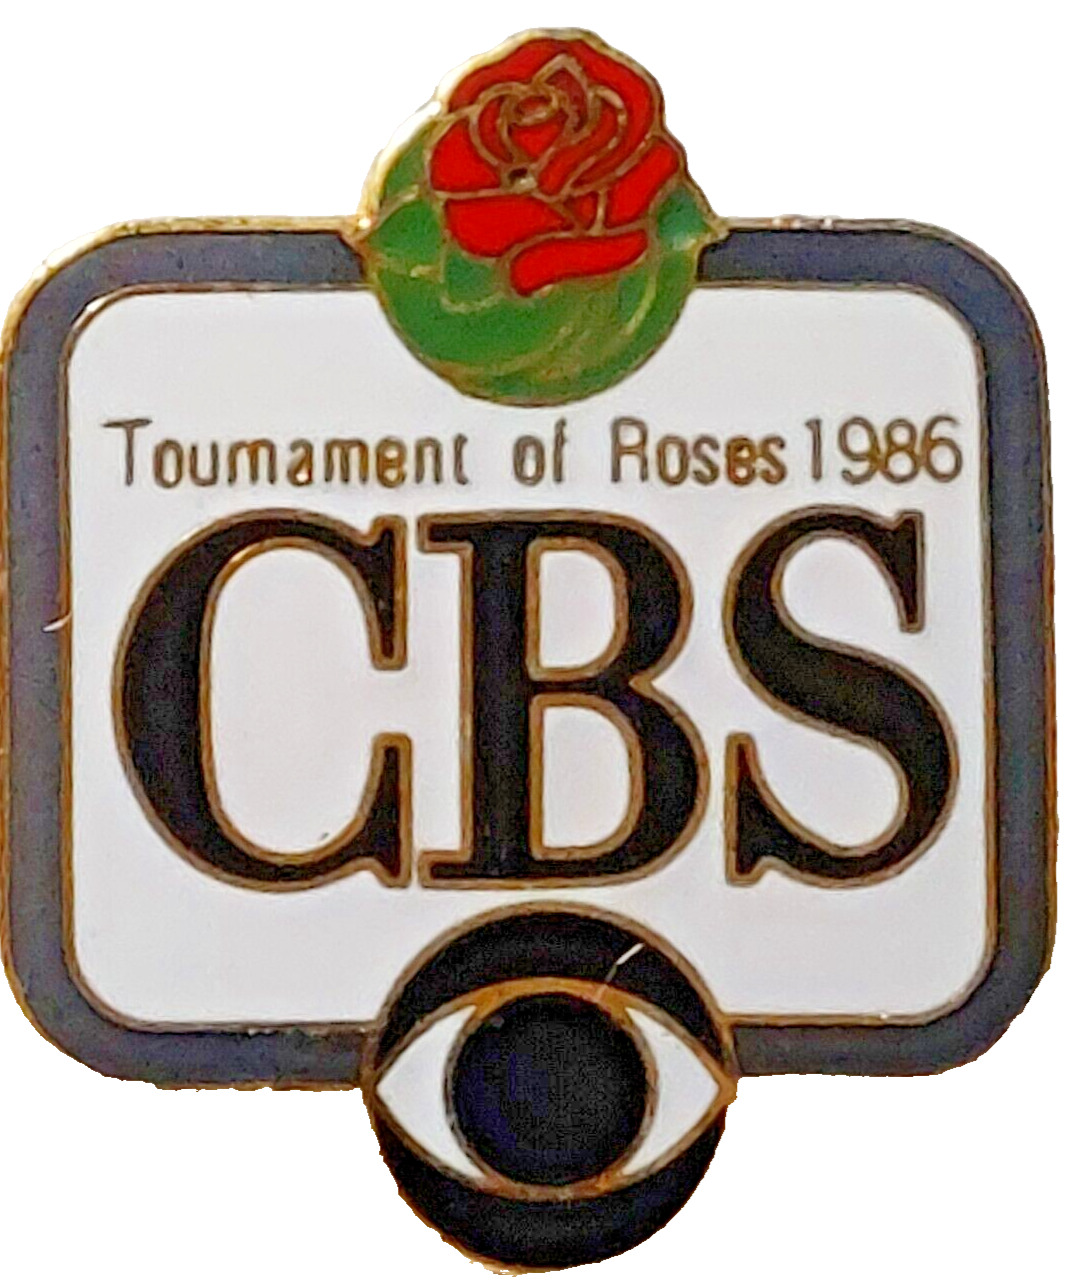 Rose Parade 1986 CBS Broadcasting 97th Tournament of Roses Lapel Pin